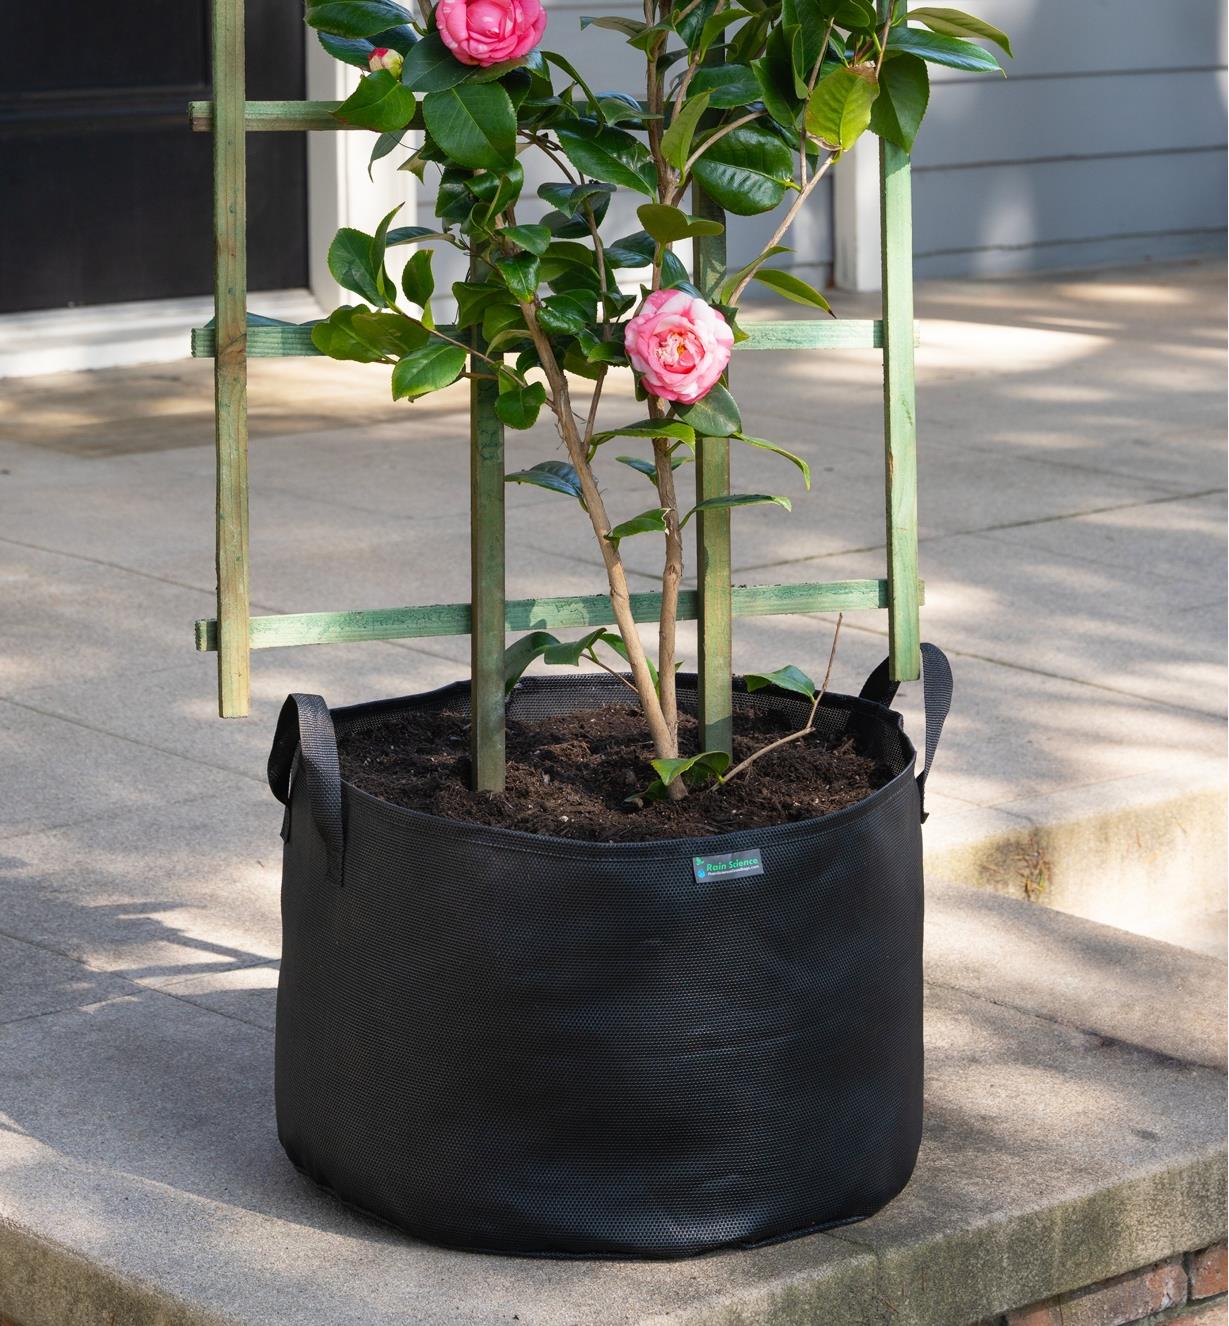 The 15 gallon mesh fabric pot with roses planted in it sits on a patio